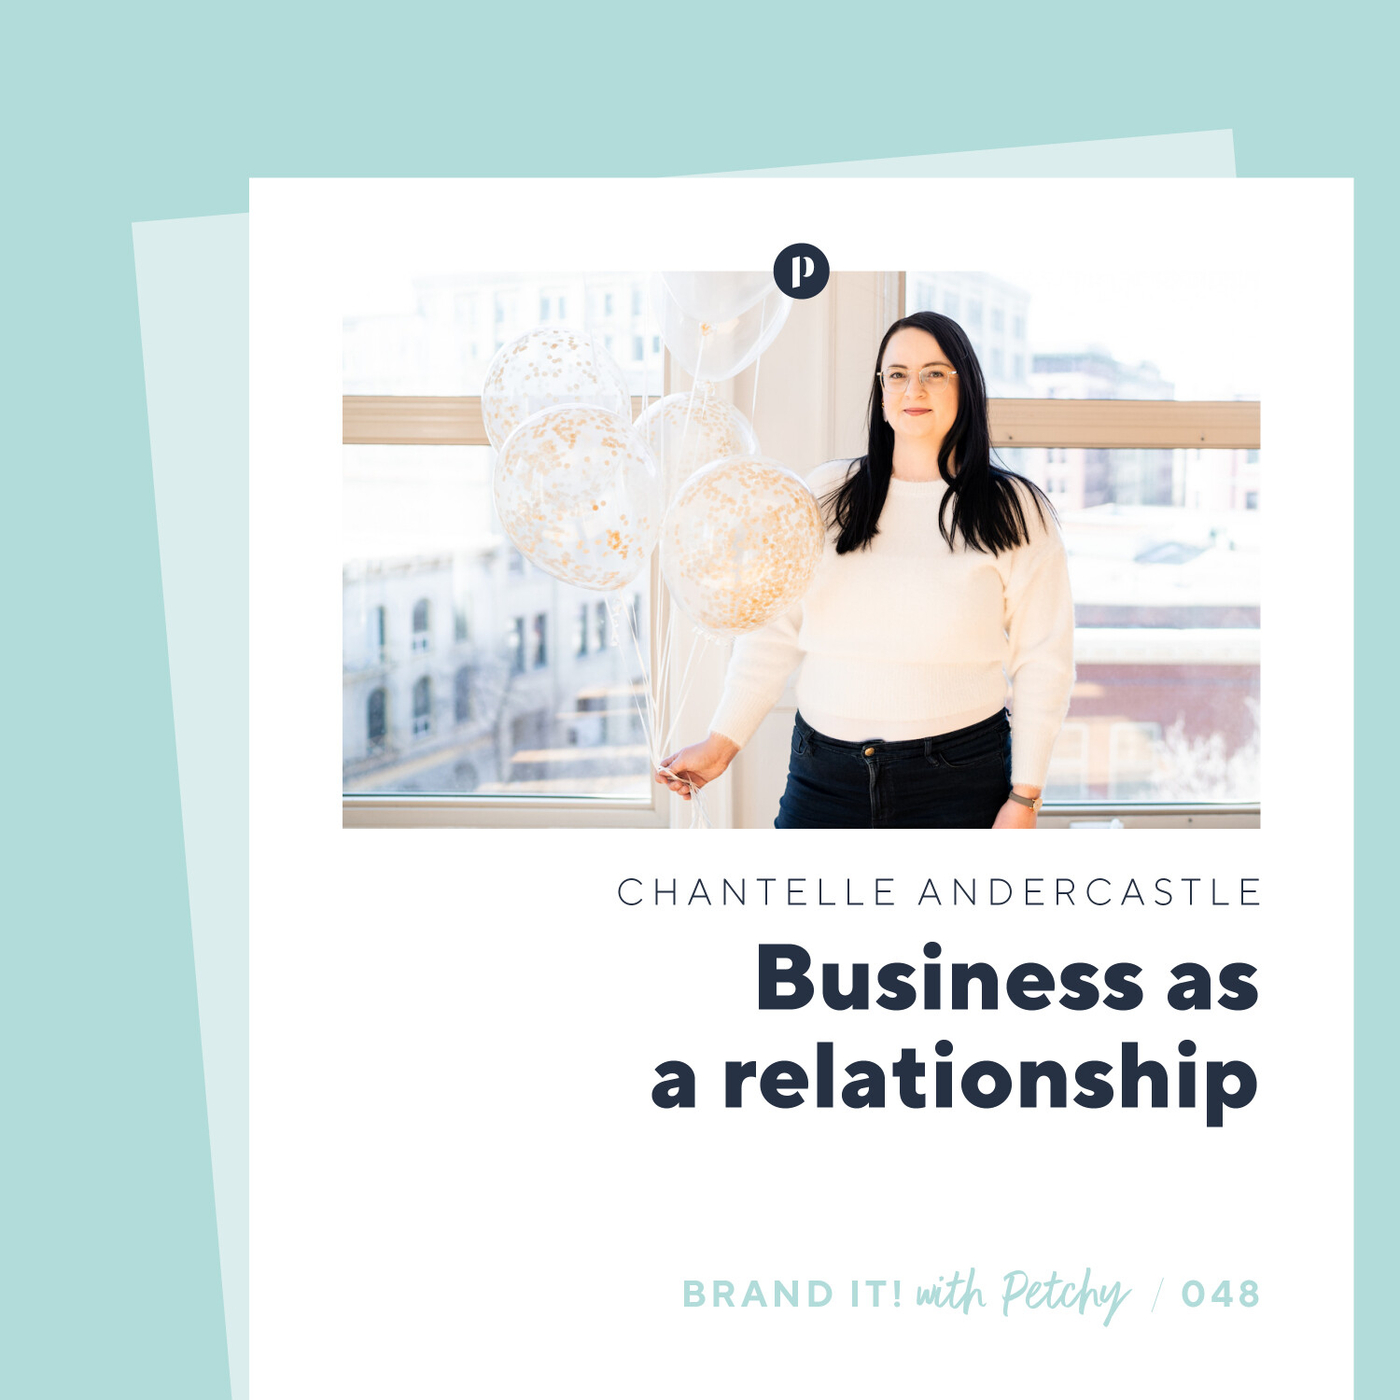 Business as a relationship w/ Chantelle Andercastle - Brand it